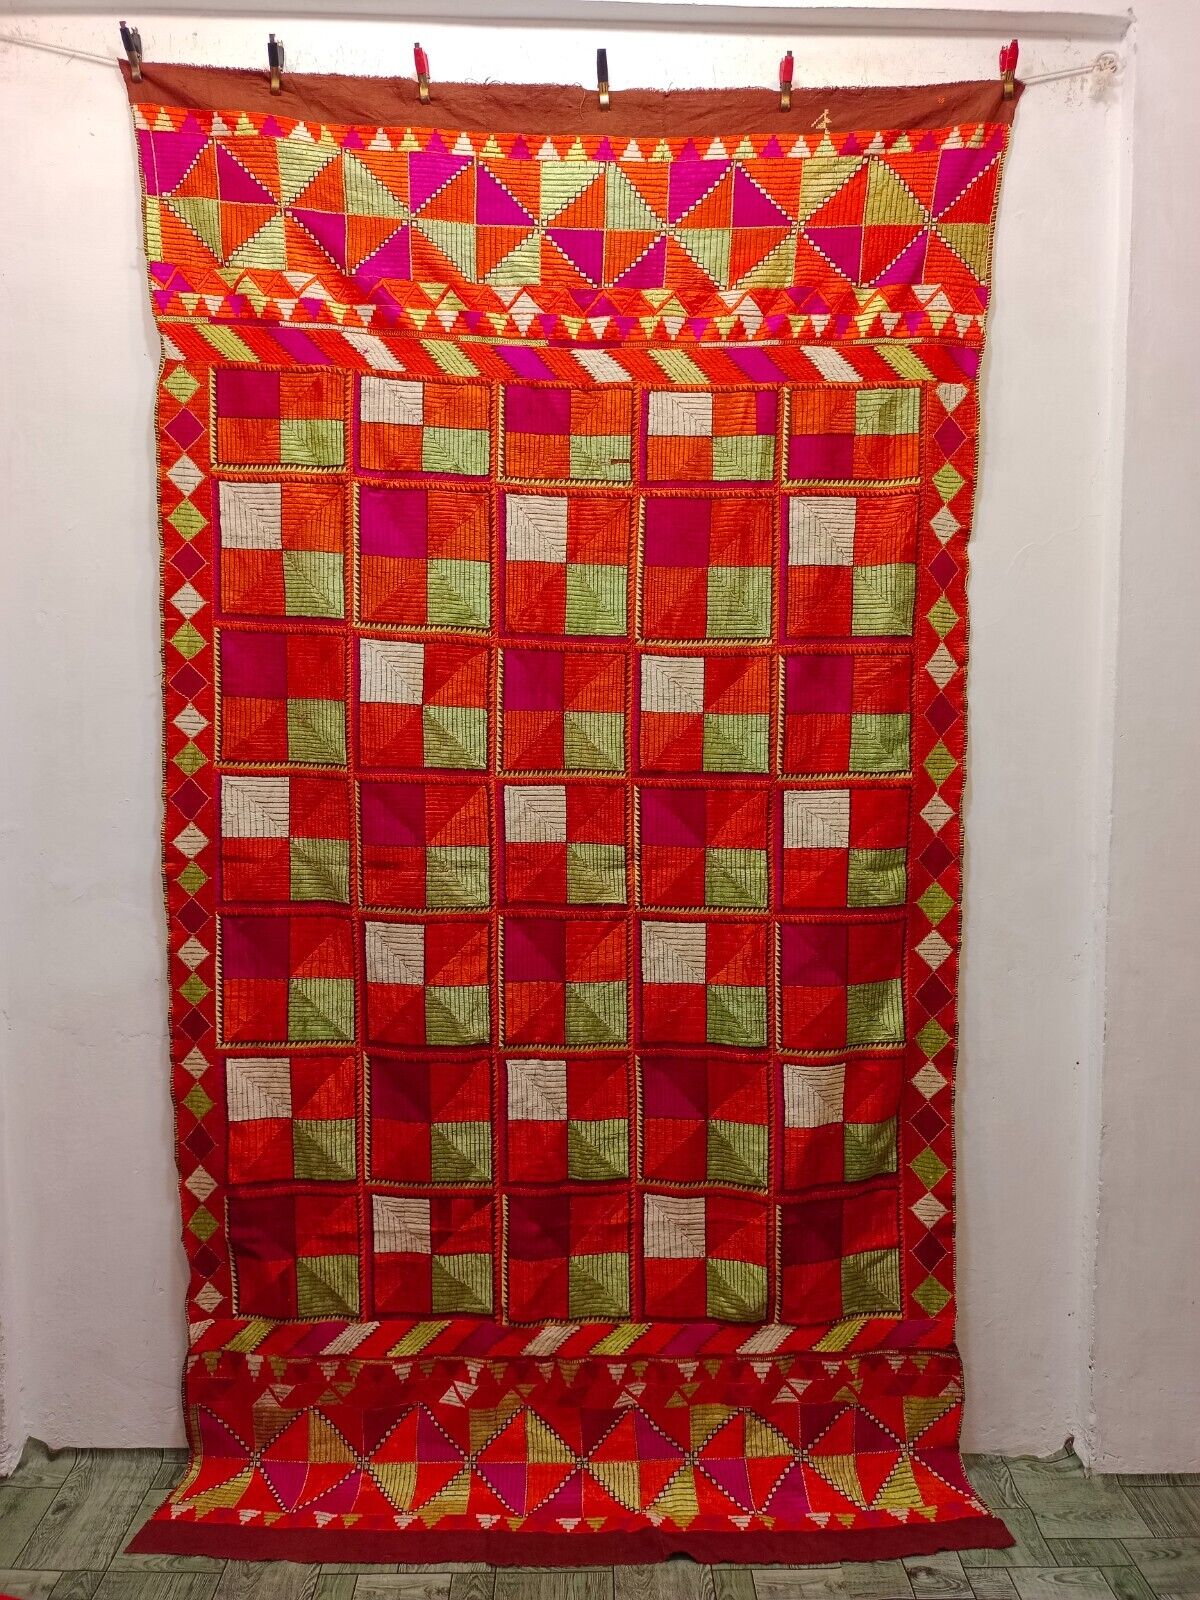 Antique Hand Embroidered Phulkari Bagh Silk Embroidery Textile 234×131 Cm